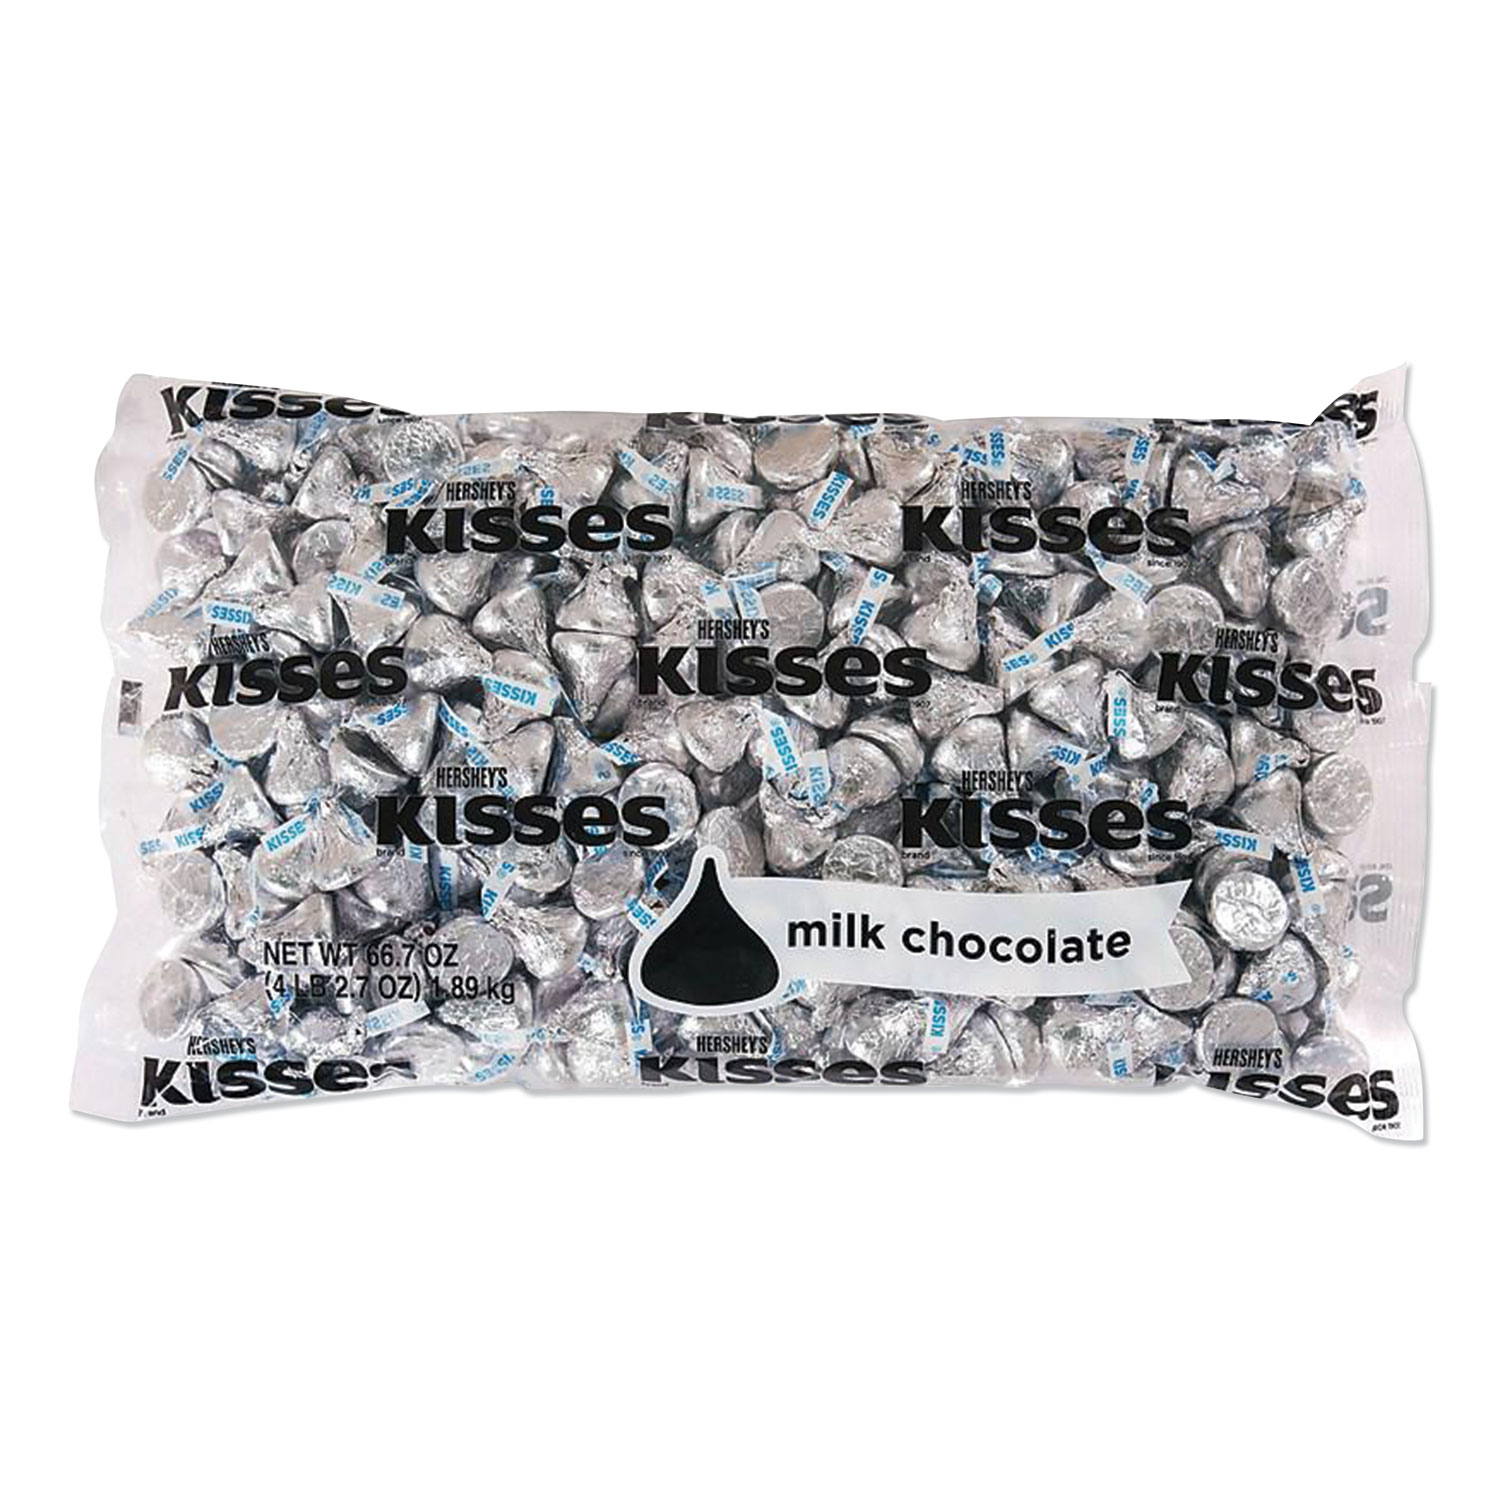  Hershey's HEC33458 KISSES, Milk Chocolate, Silver Wrappers, 66.7 oz Bag (HRS1504286) 